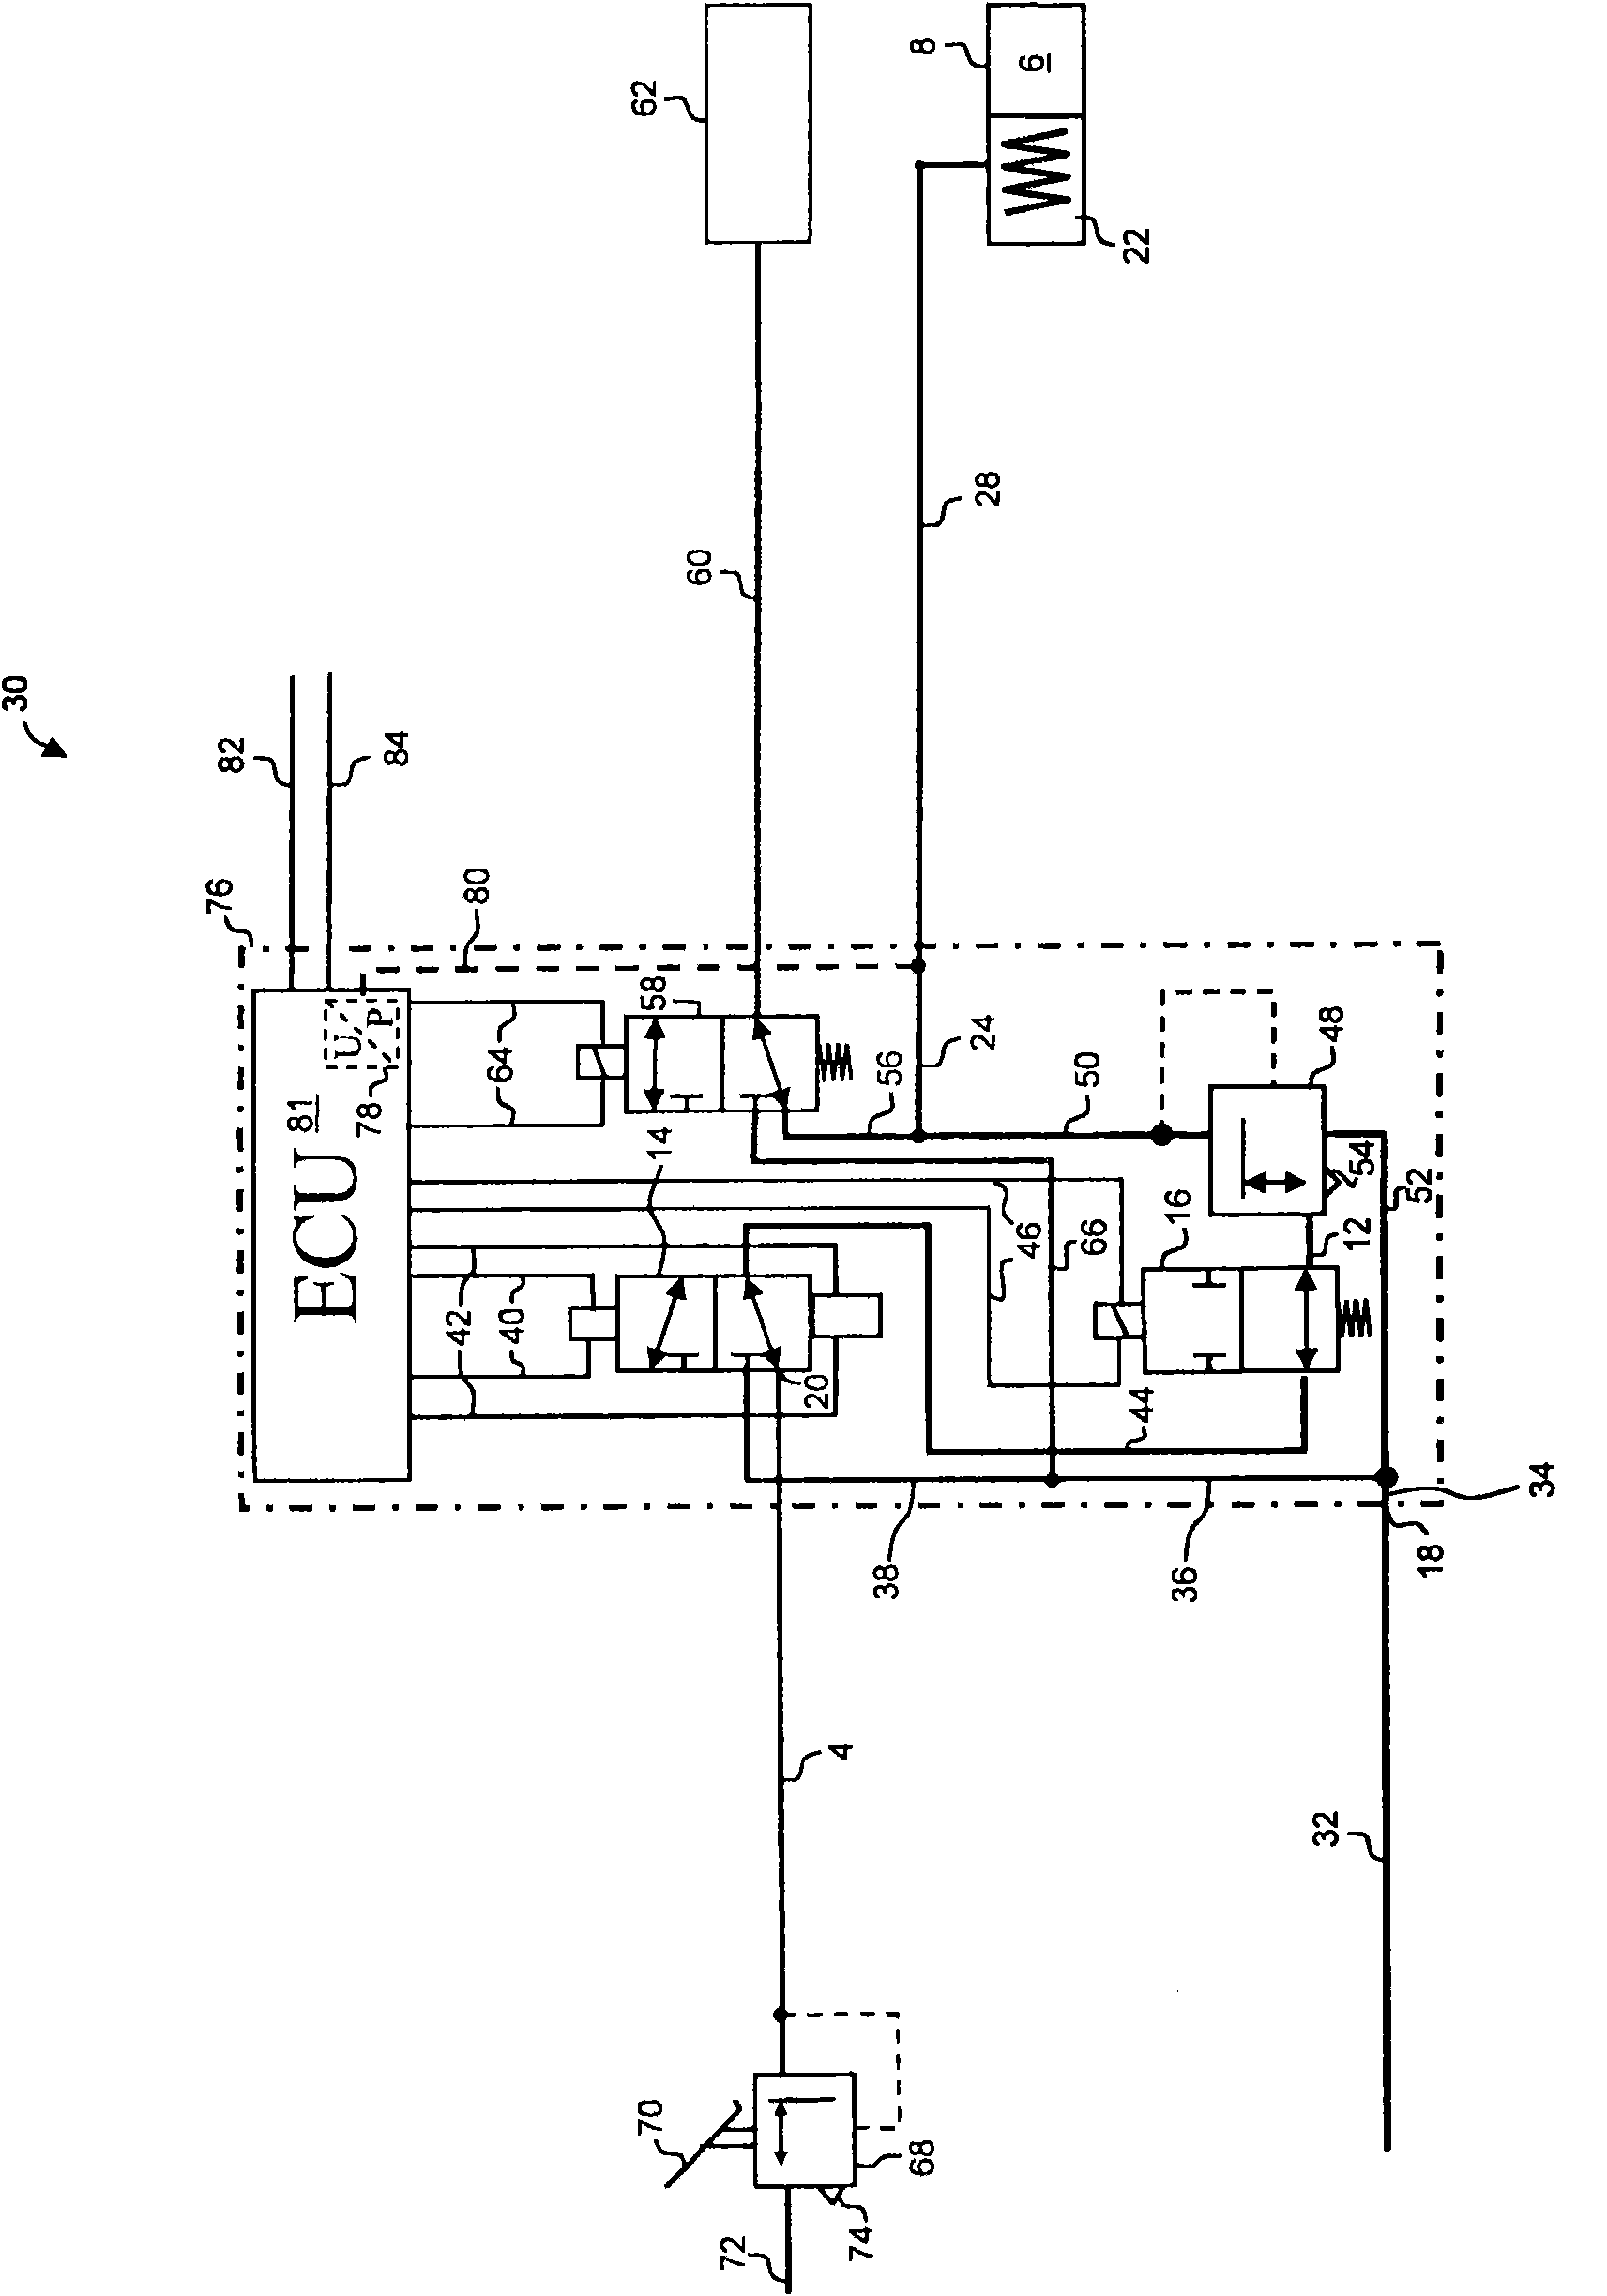 Brake system for a vehicle